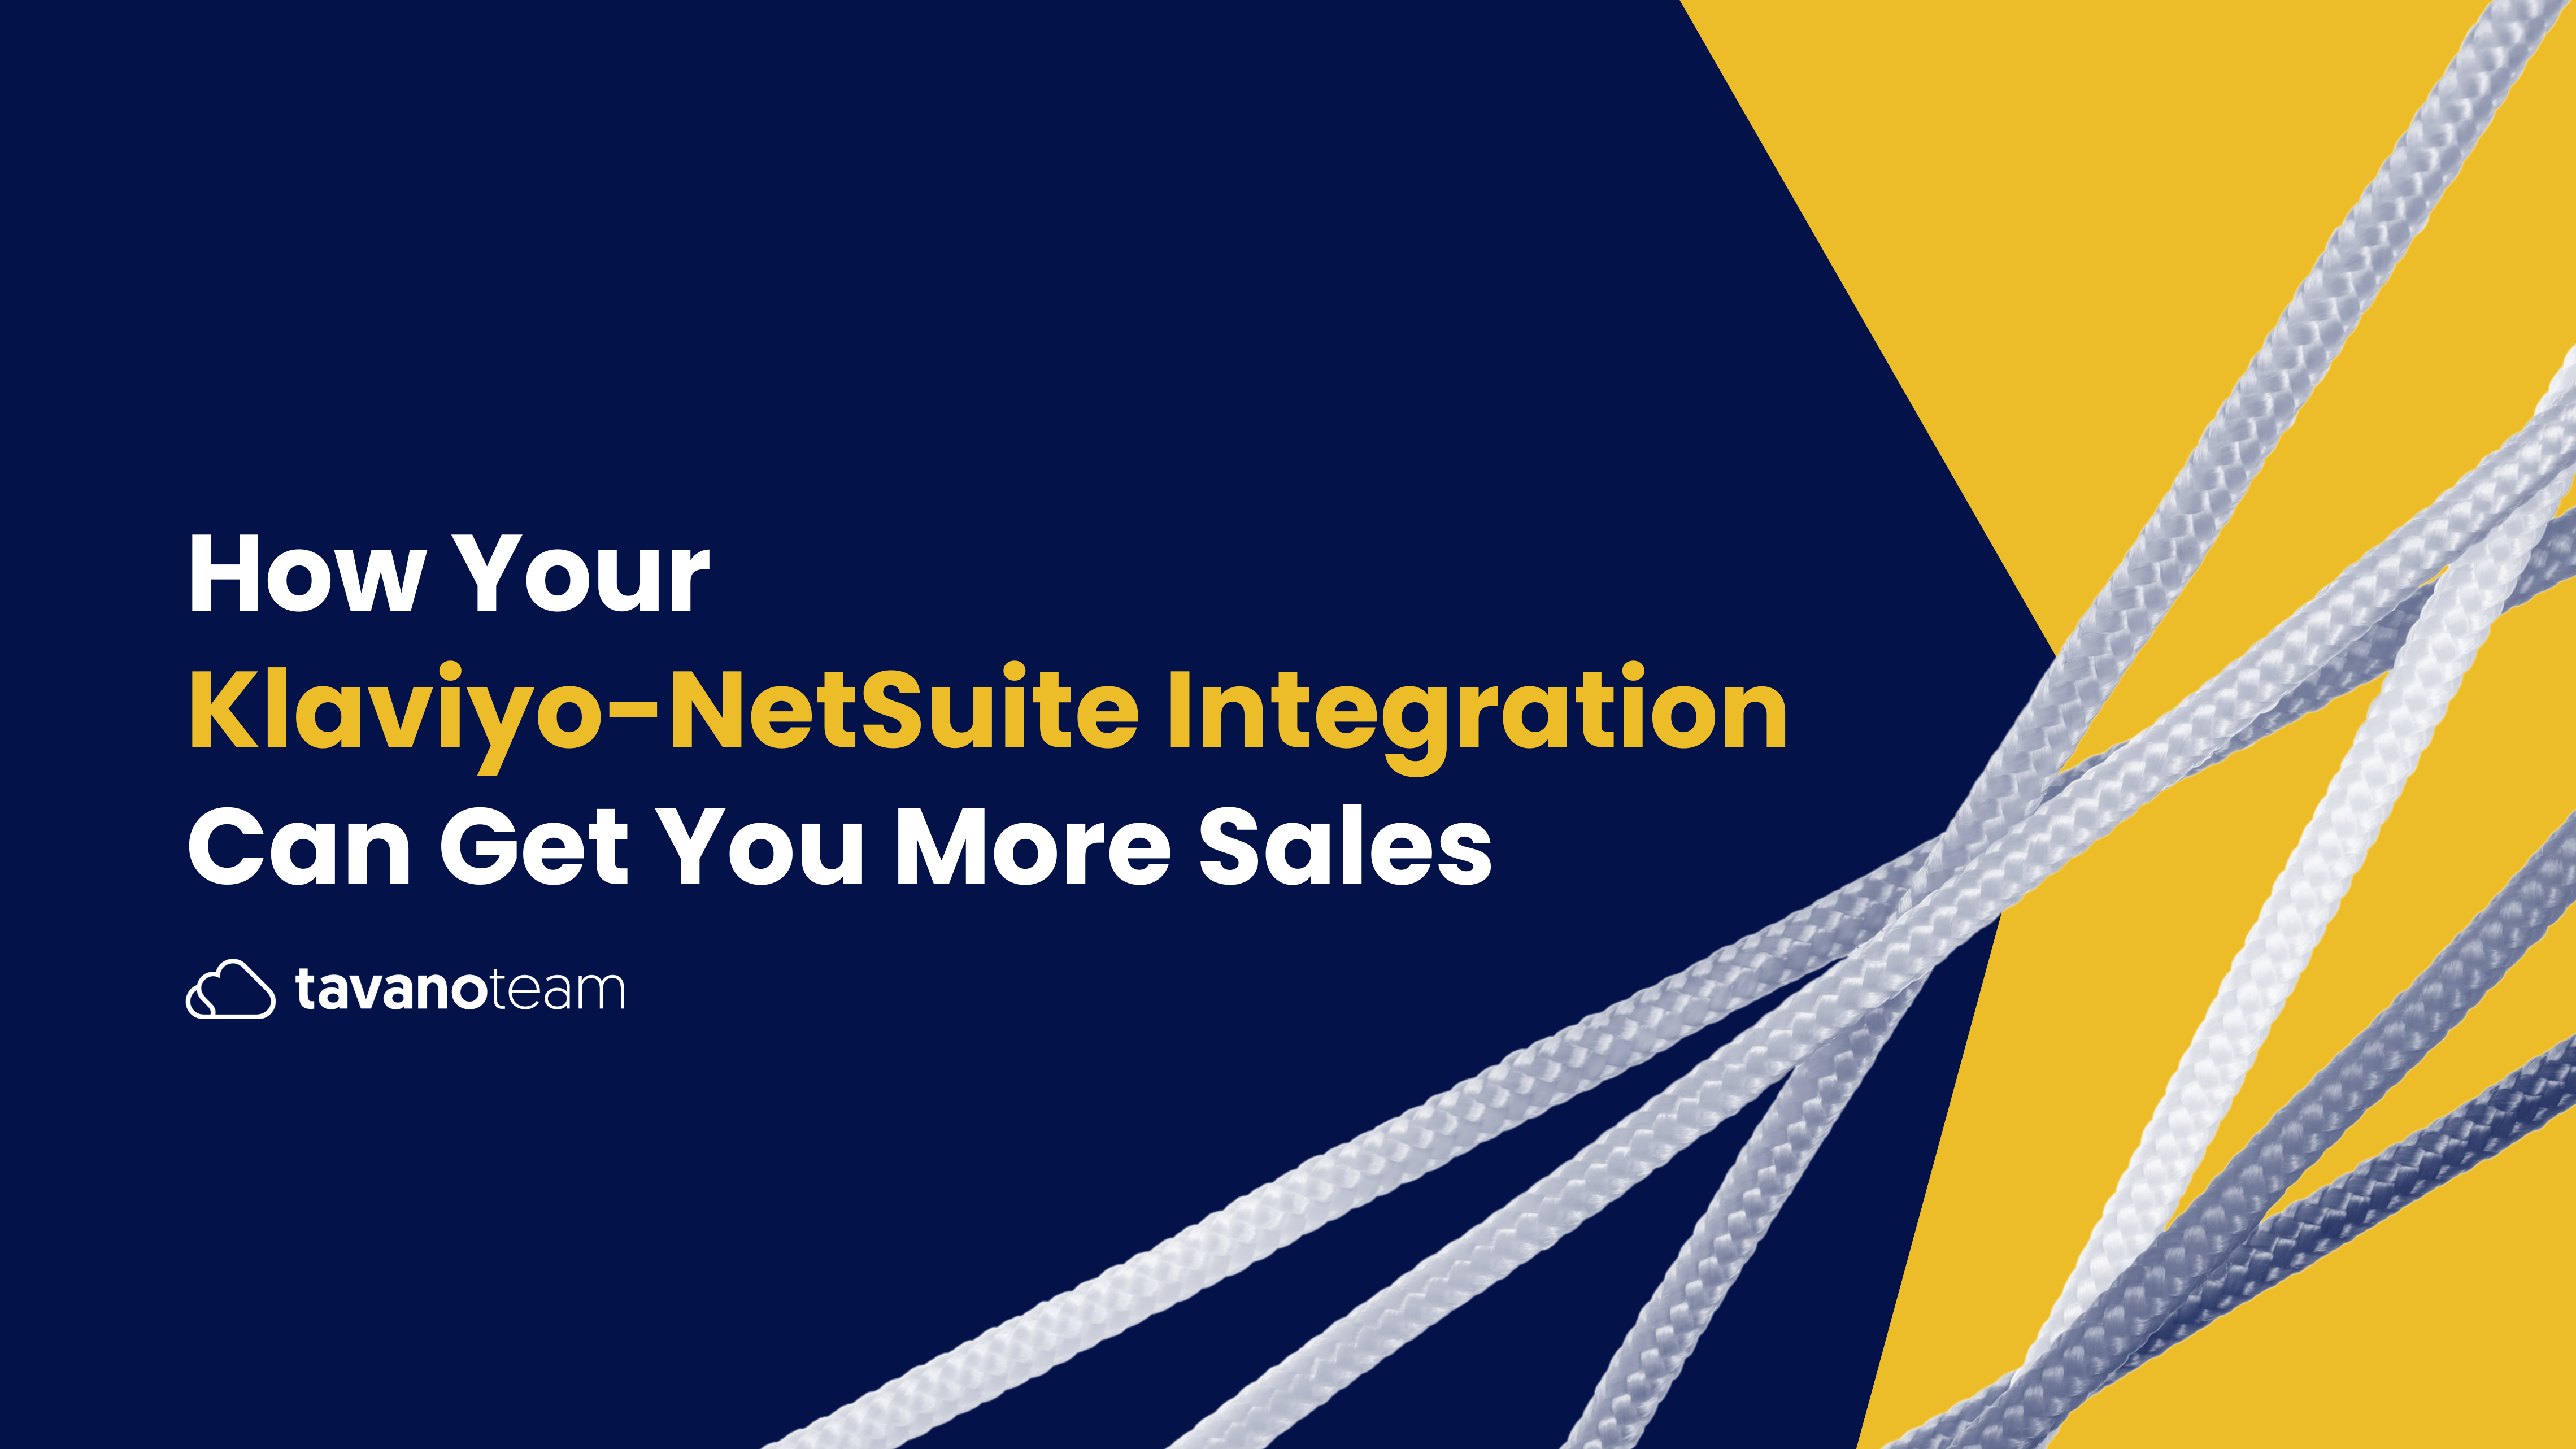 How-Your-Klaviyo-NetSuite-Integration-Can-Get-You-More-Sales